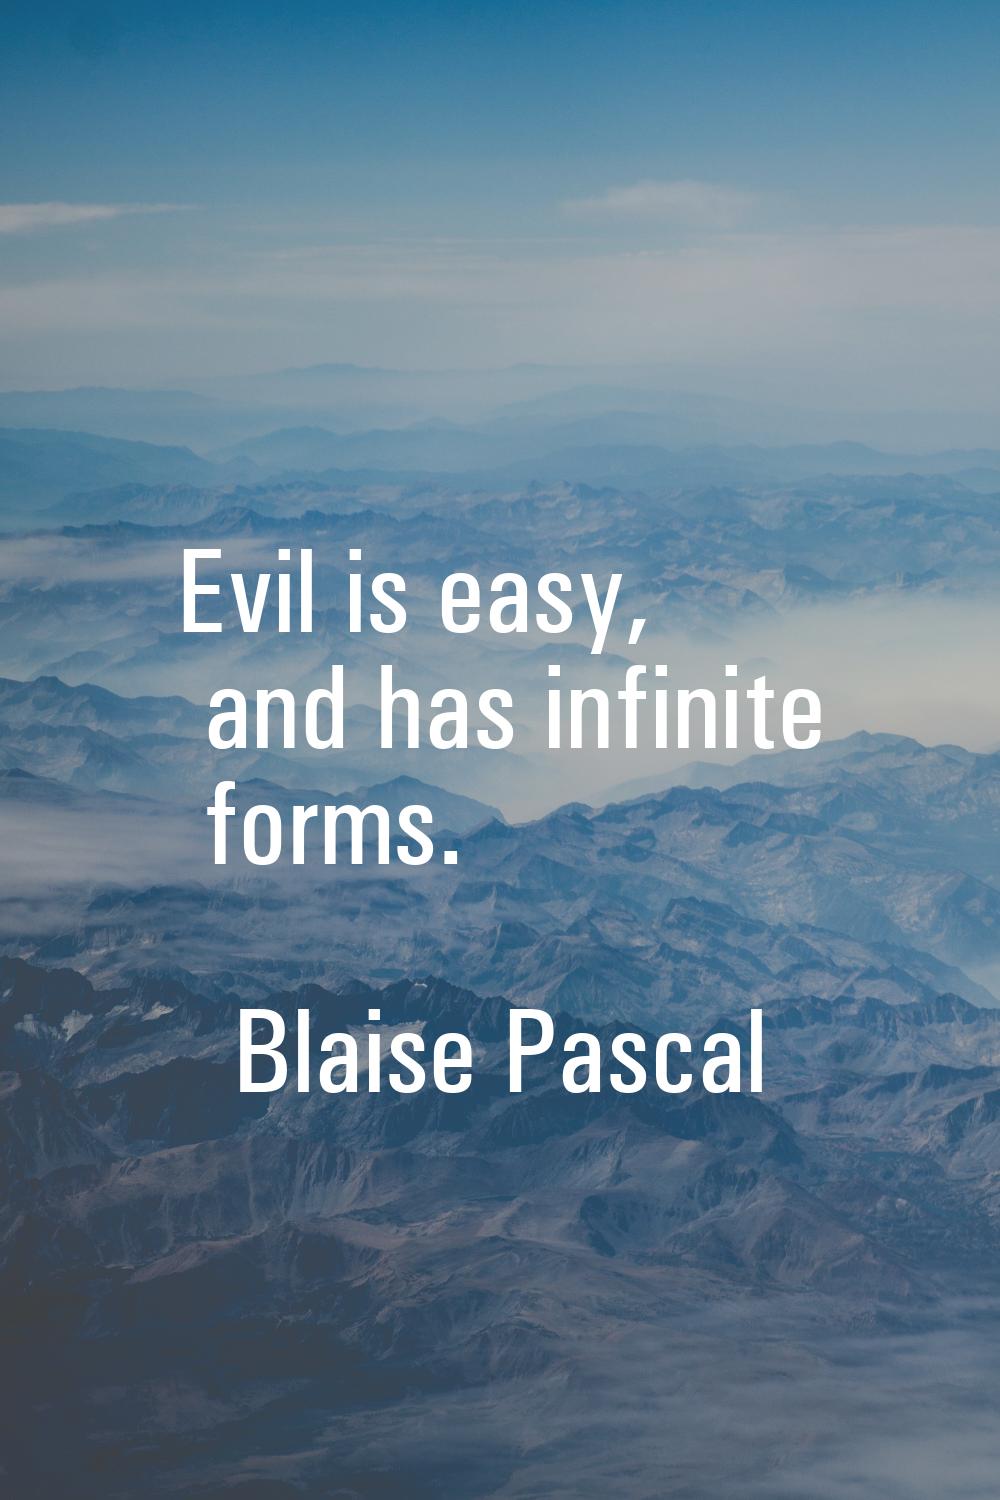 Evil is easy, and has infinite forms.